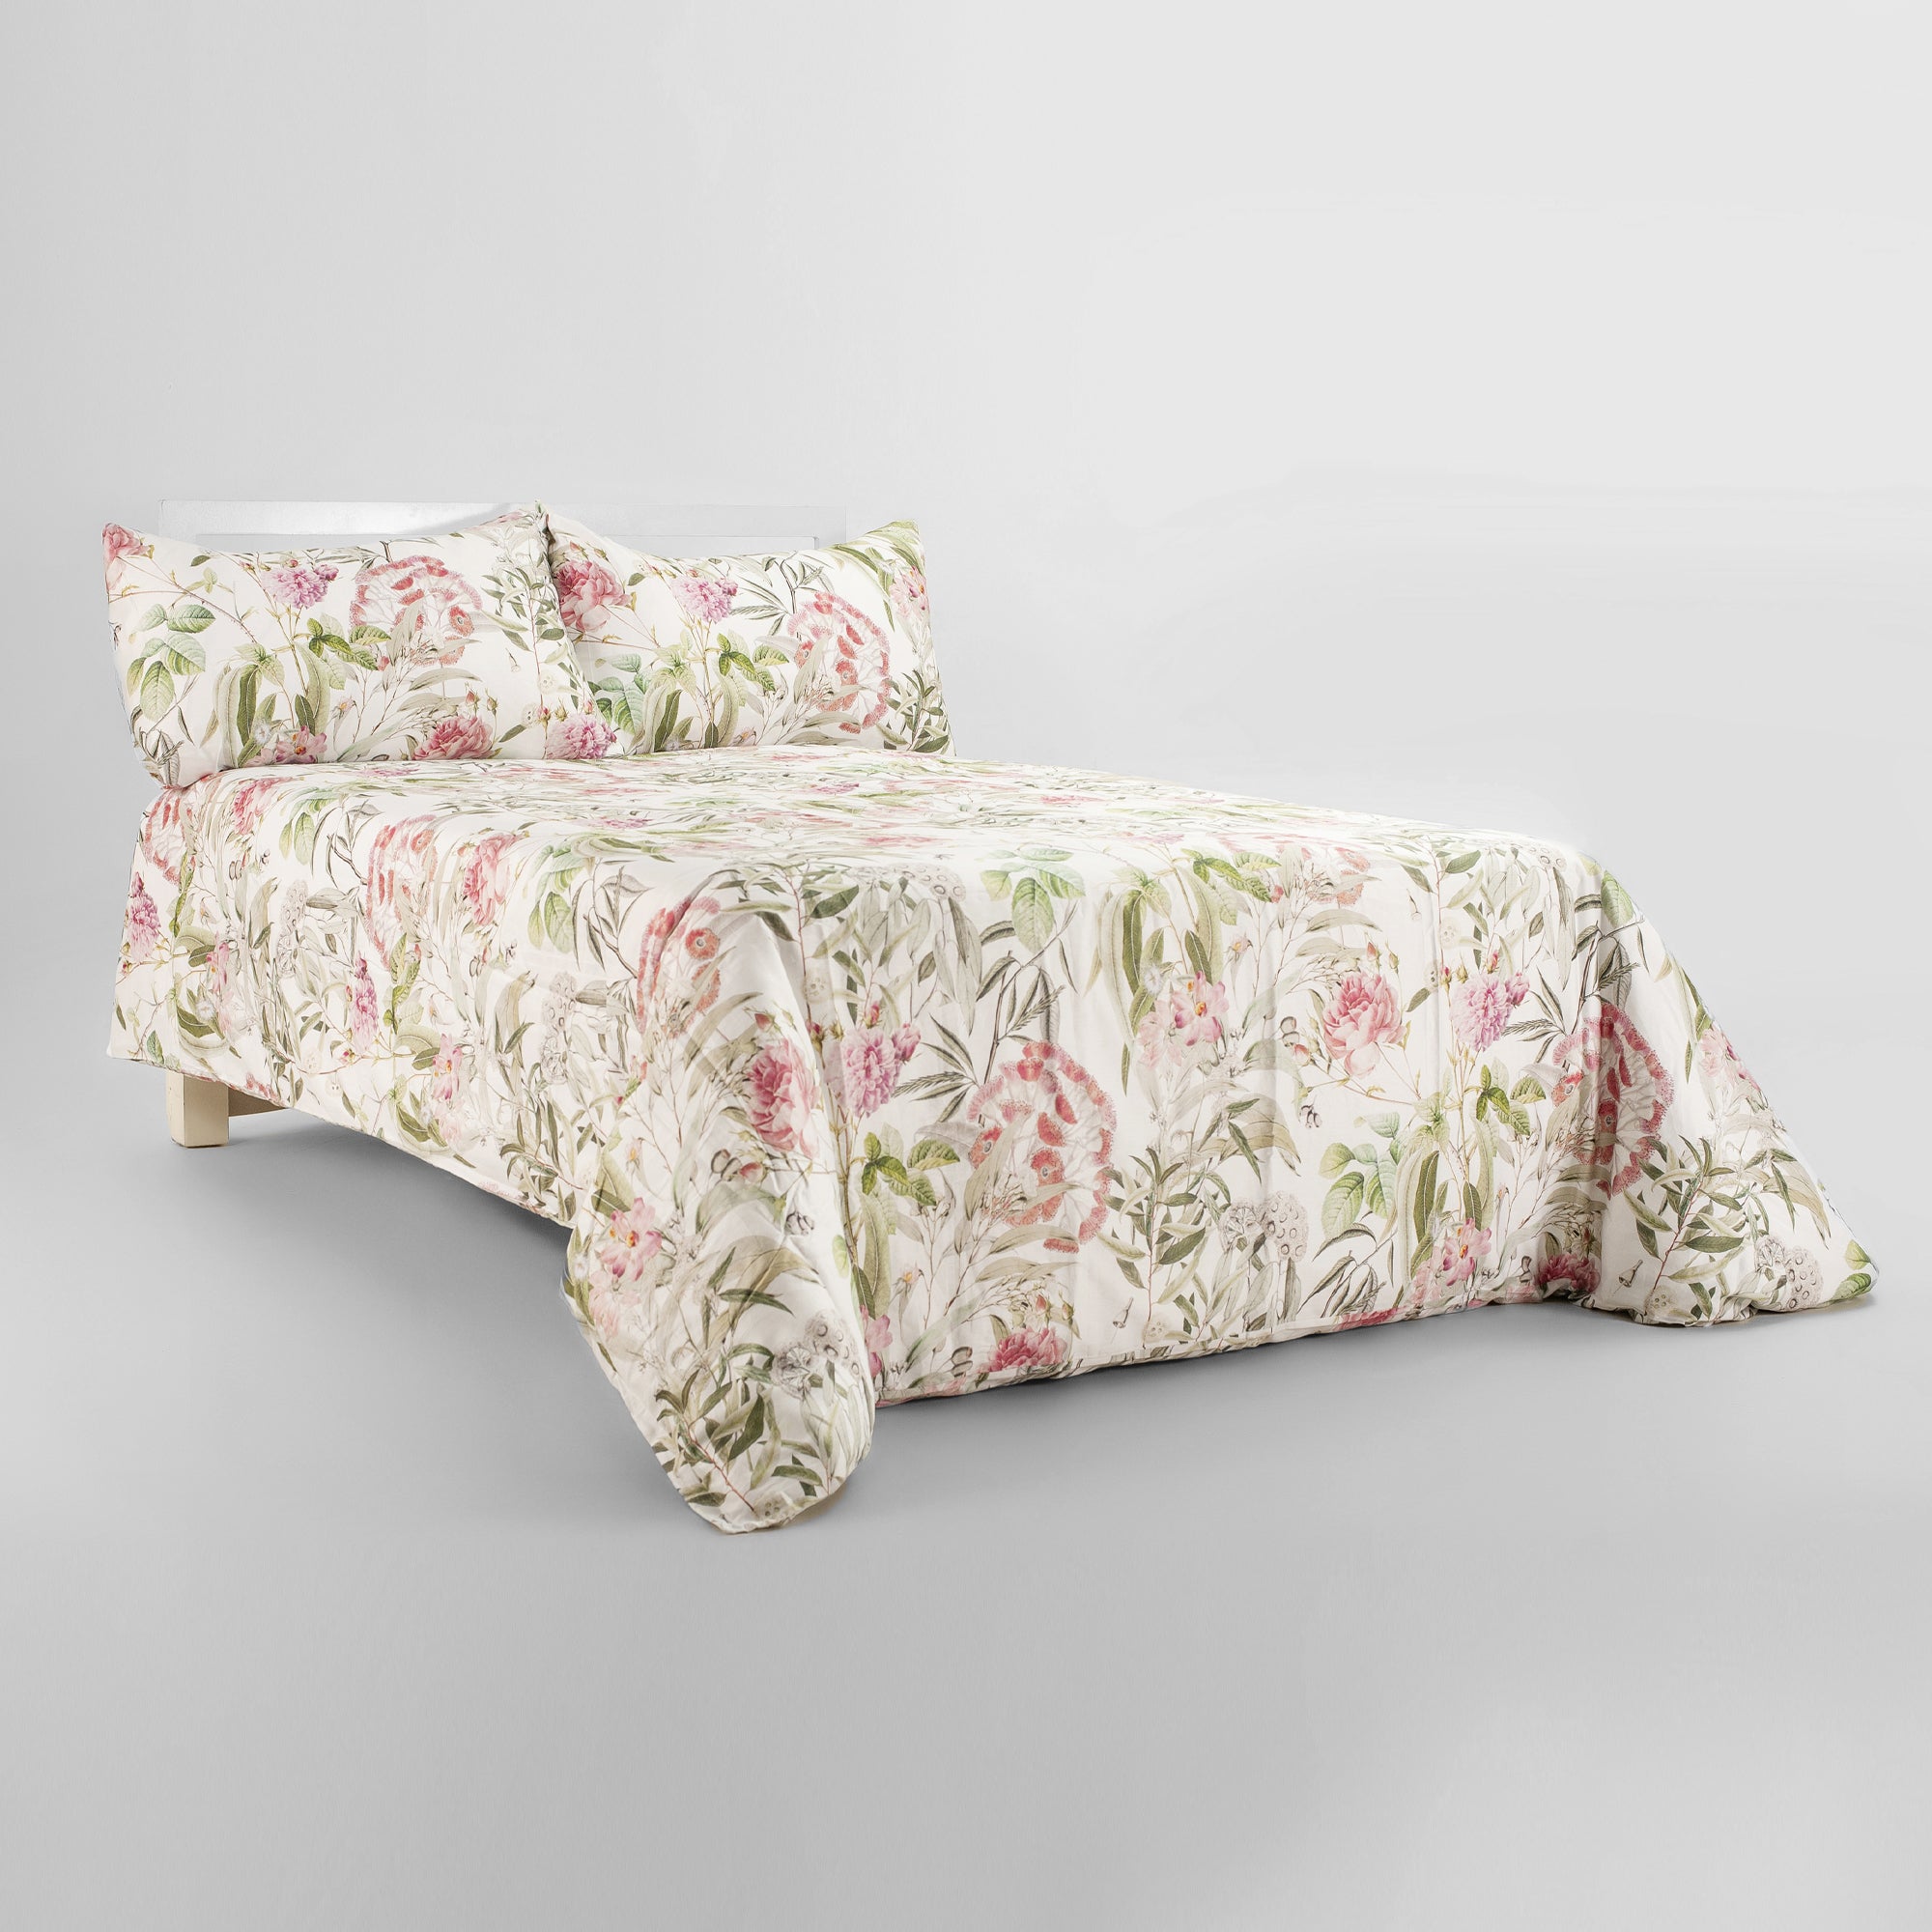 The Linen Company Bedding Spring Bloom Bed Sheet Set